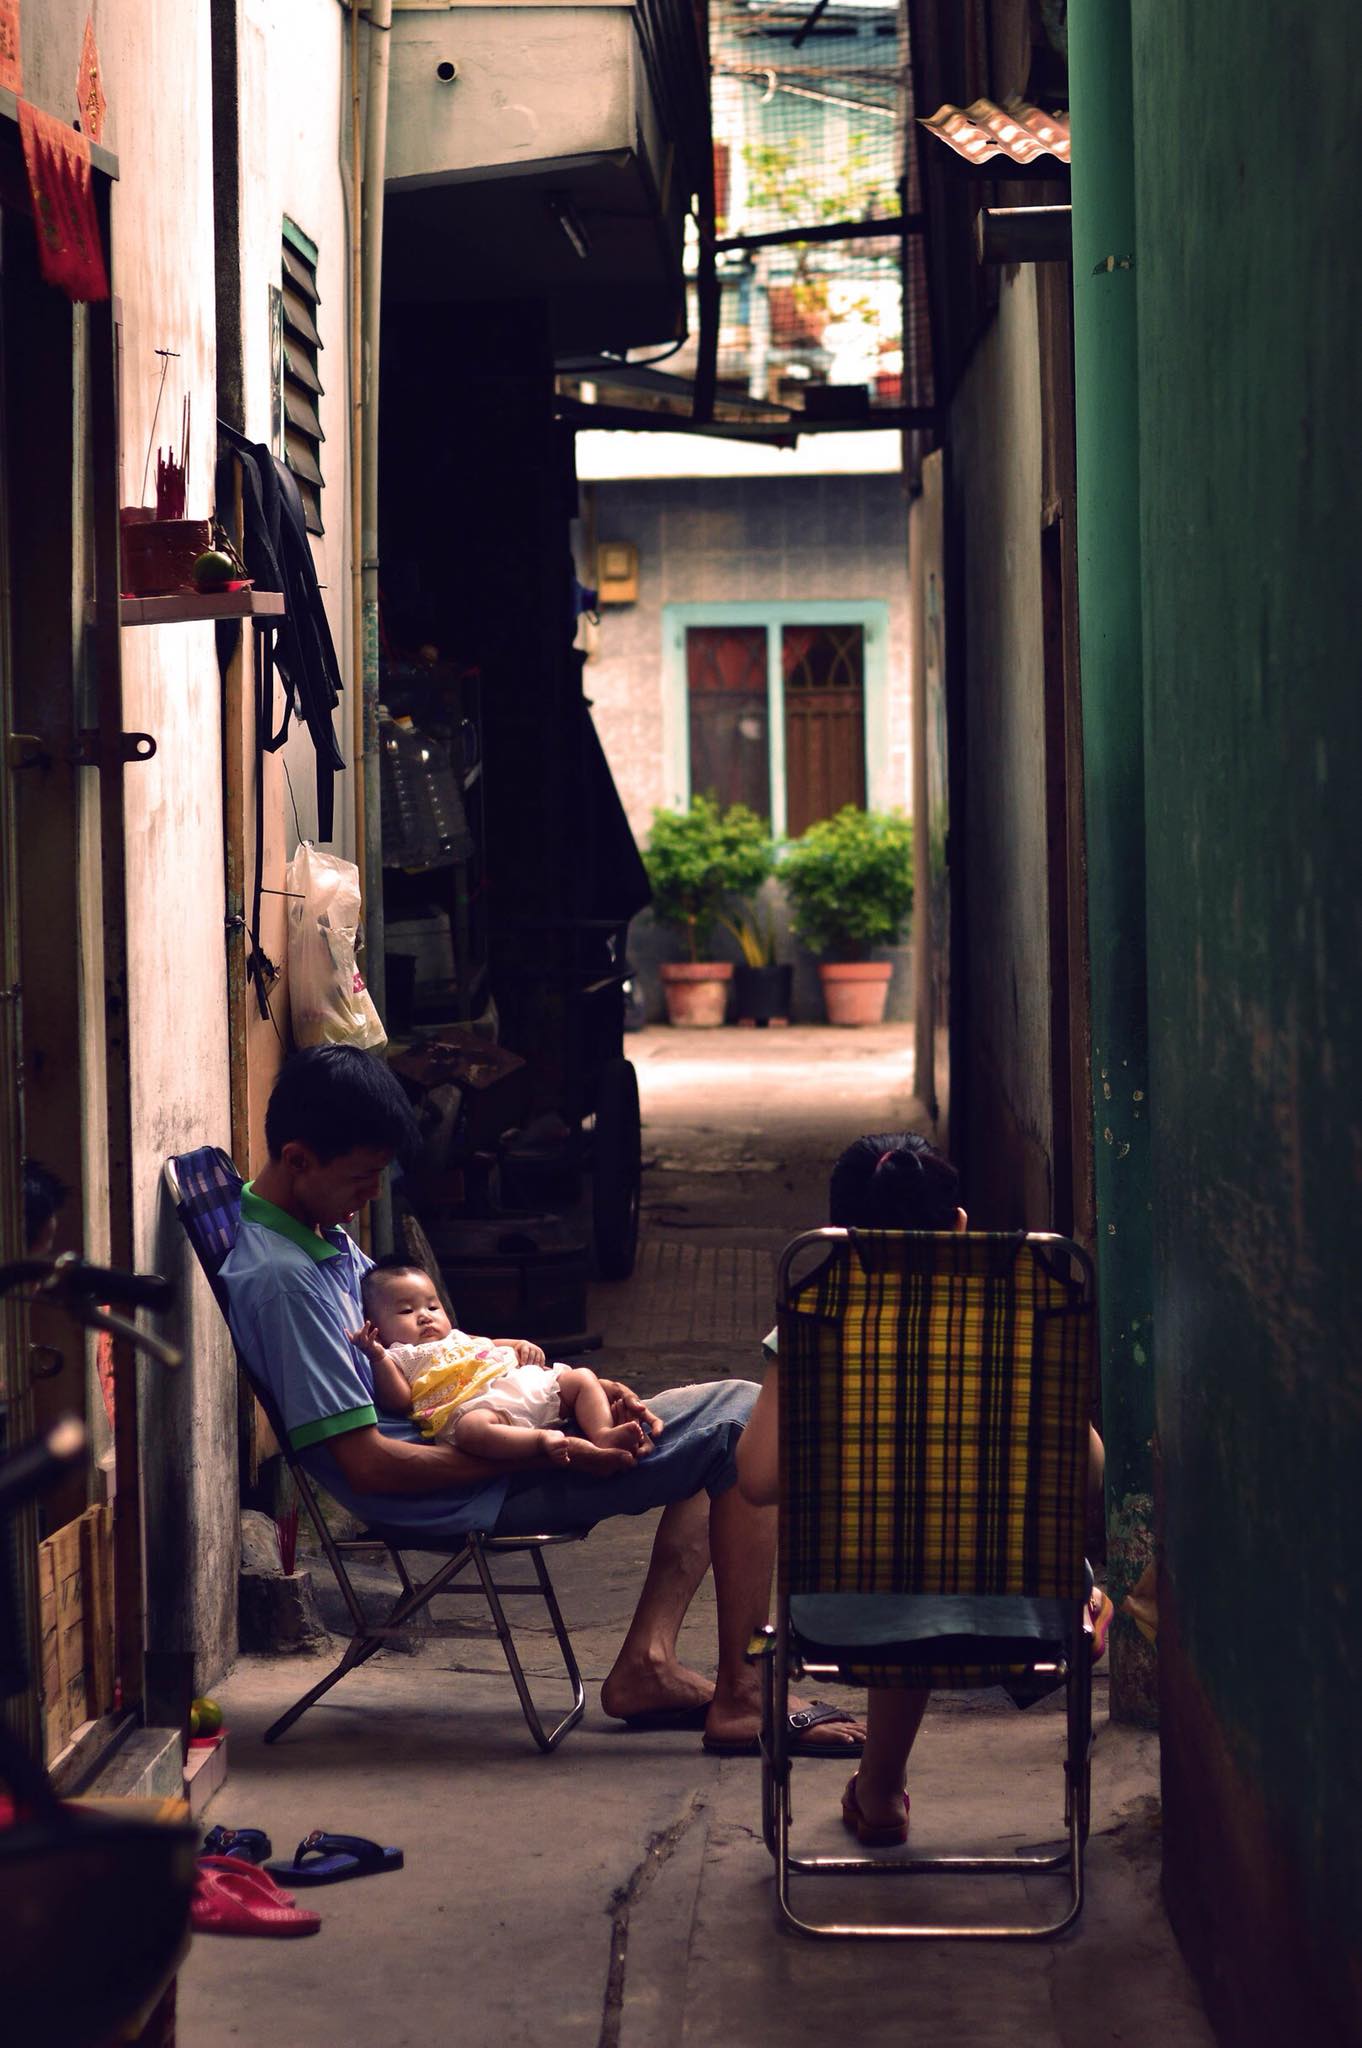 A man hugs his baby in the lap. Photo: Humans of Saigon